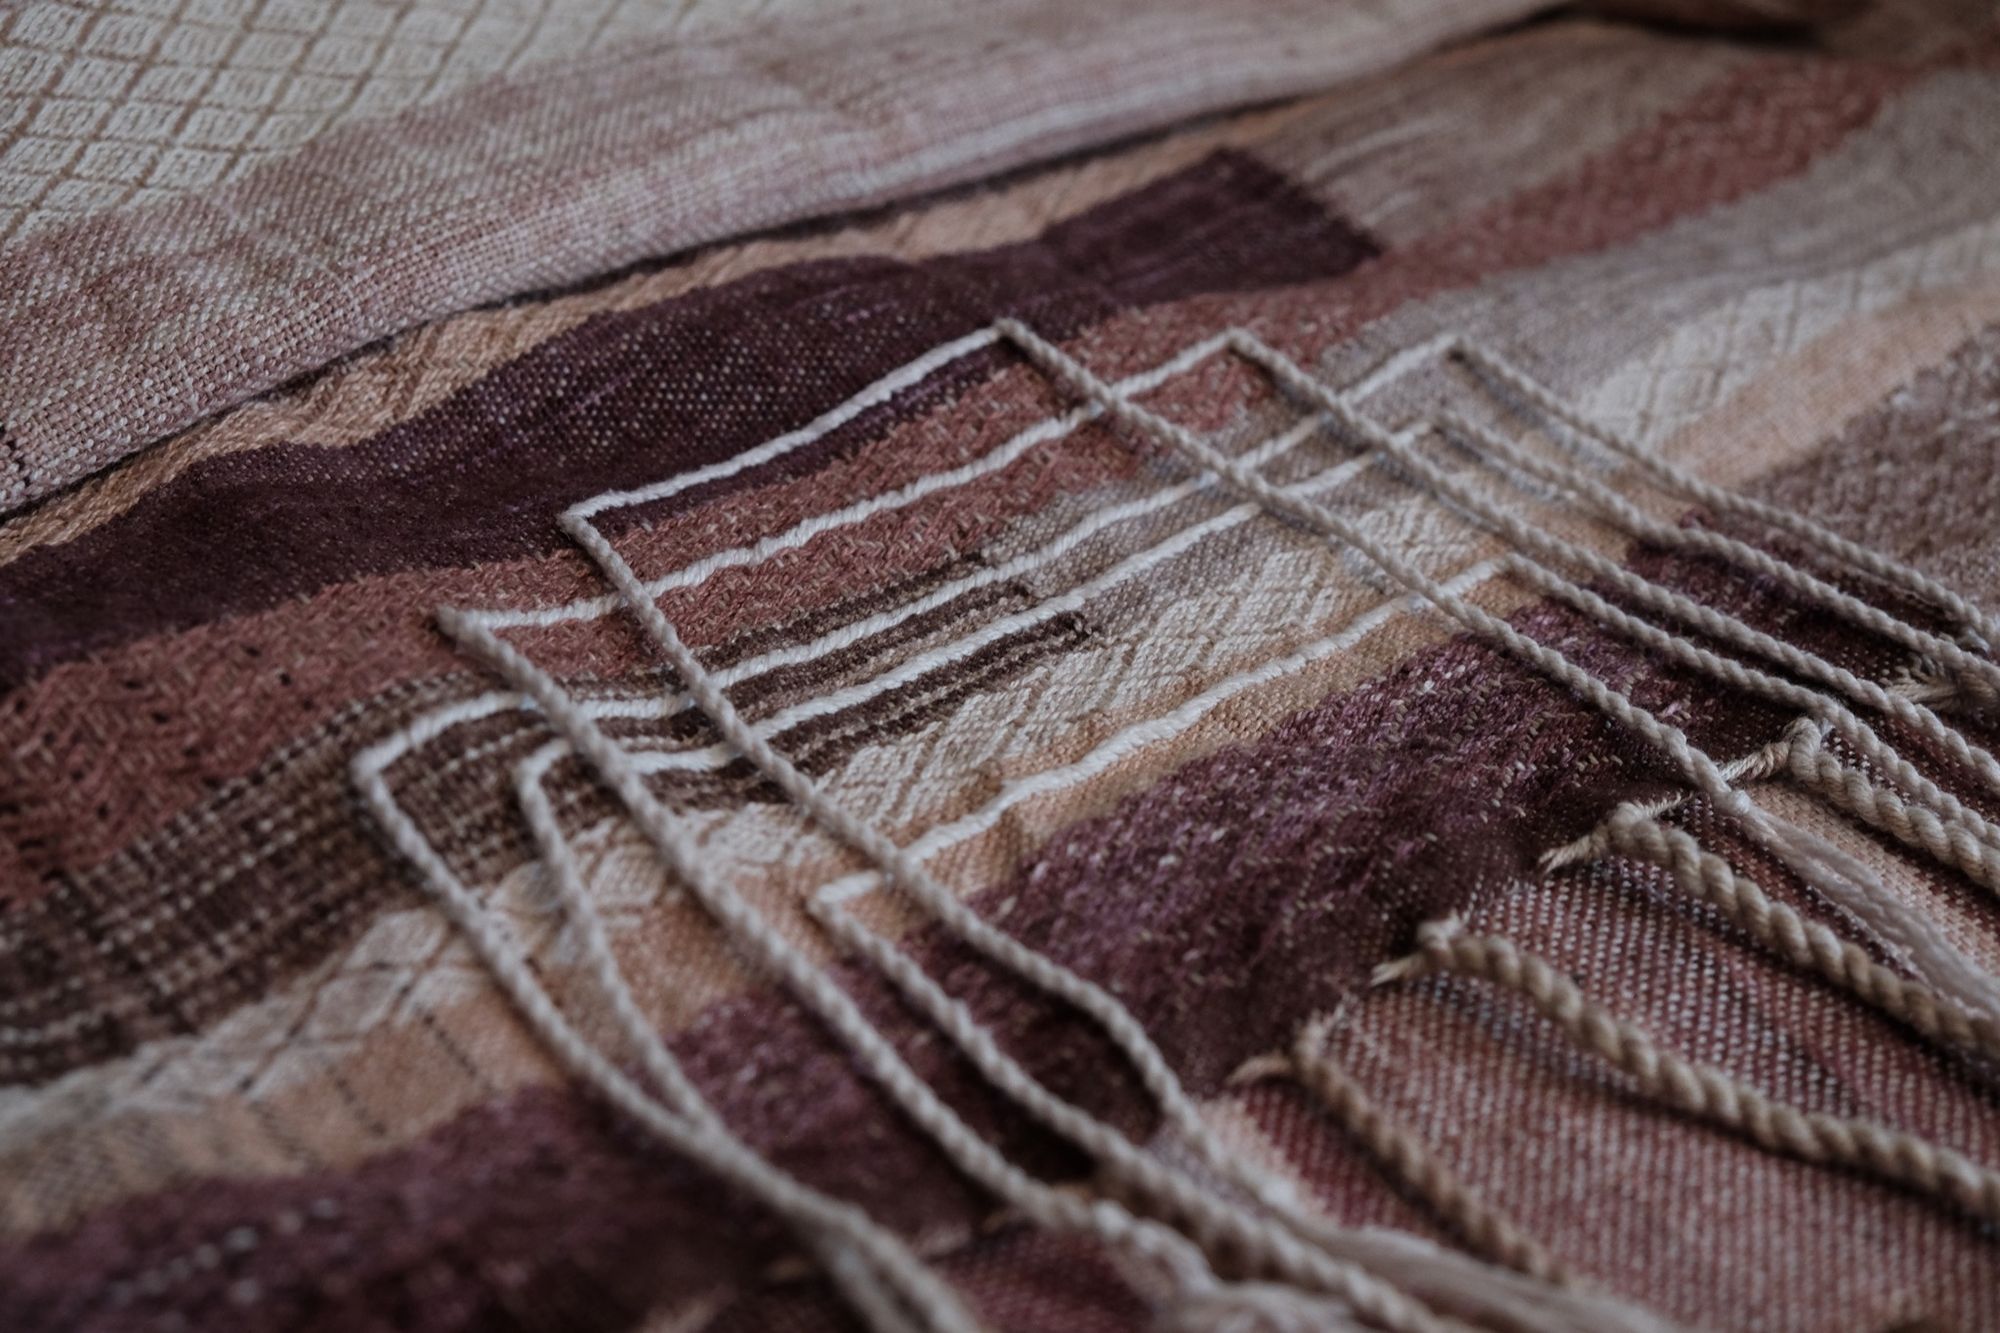 On a wooden floor rests handwoven fabric in shades of purple, mauve, burgundy and grey with geometric patterns, diamond weave and moon phases